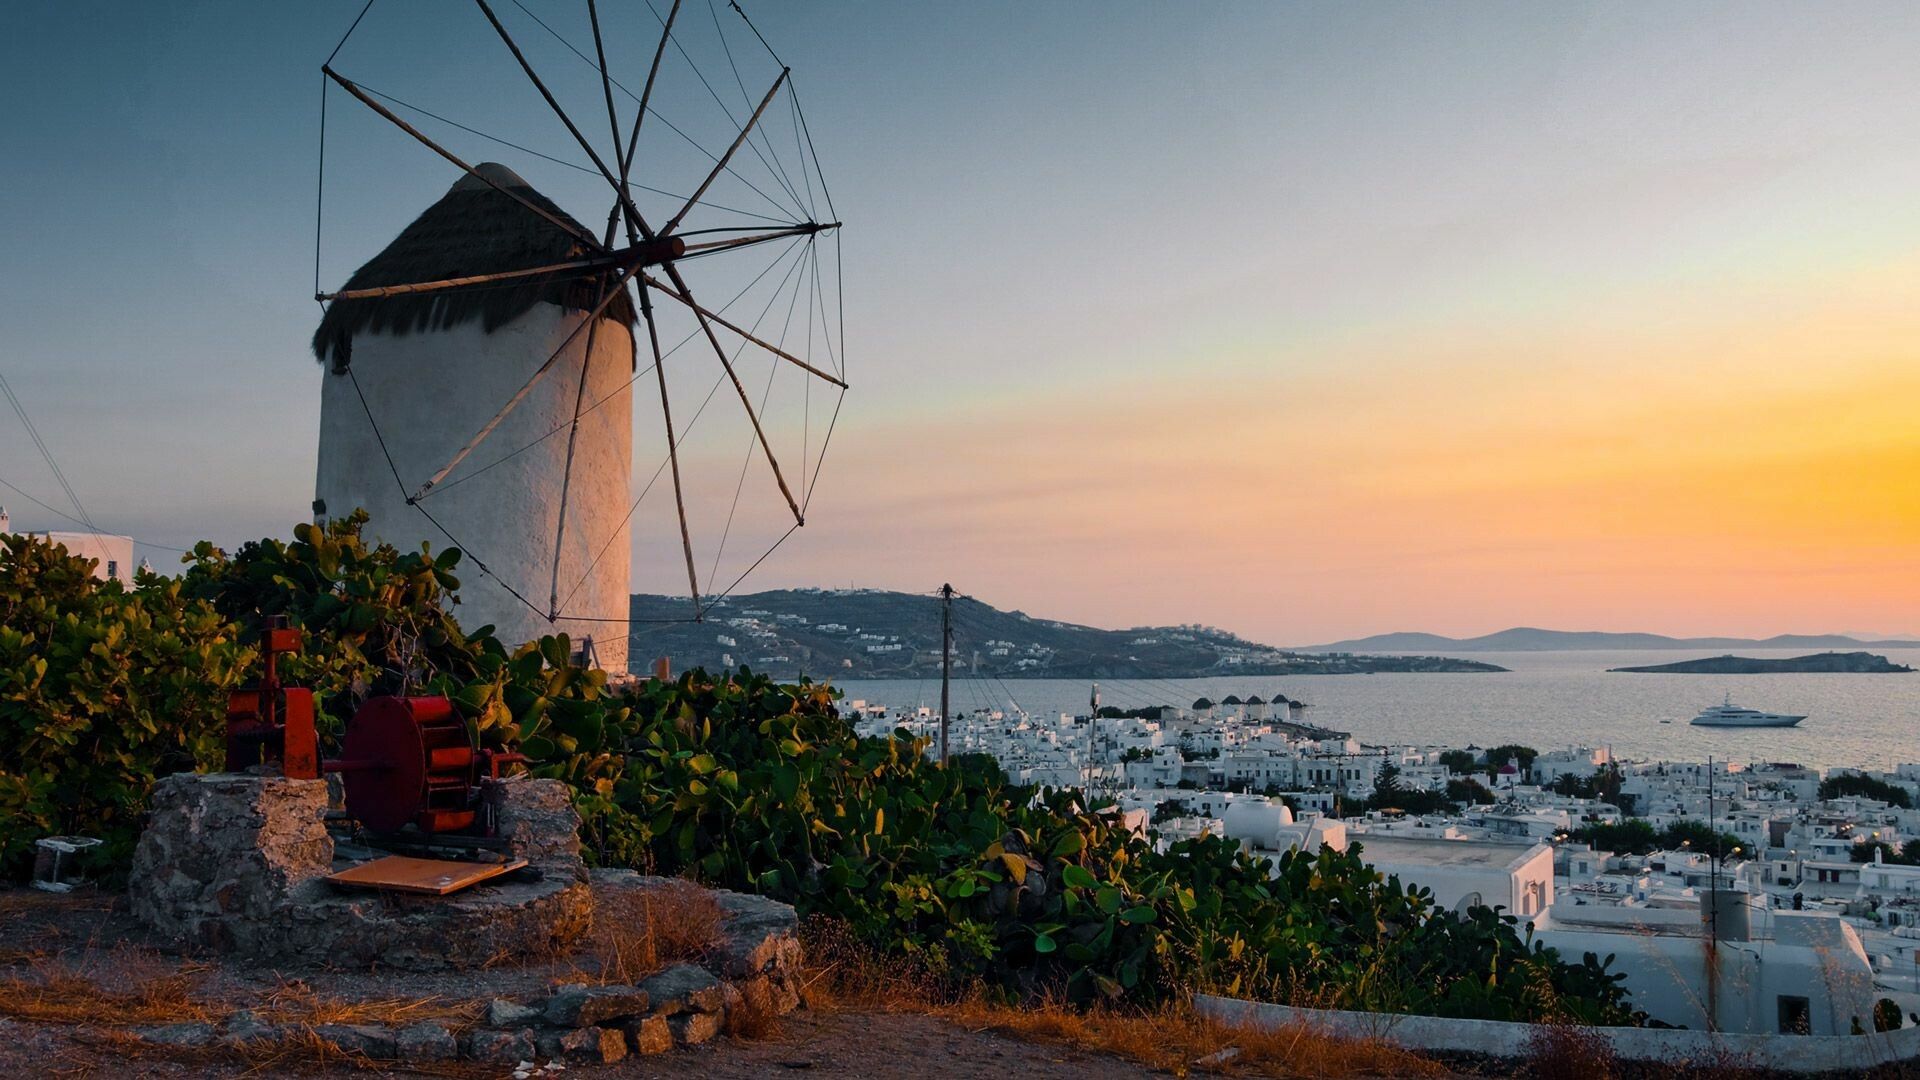 the-traditional-windmills-of-mykonos-is-one-of-the-best-sunset-spots-1